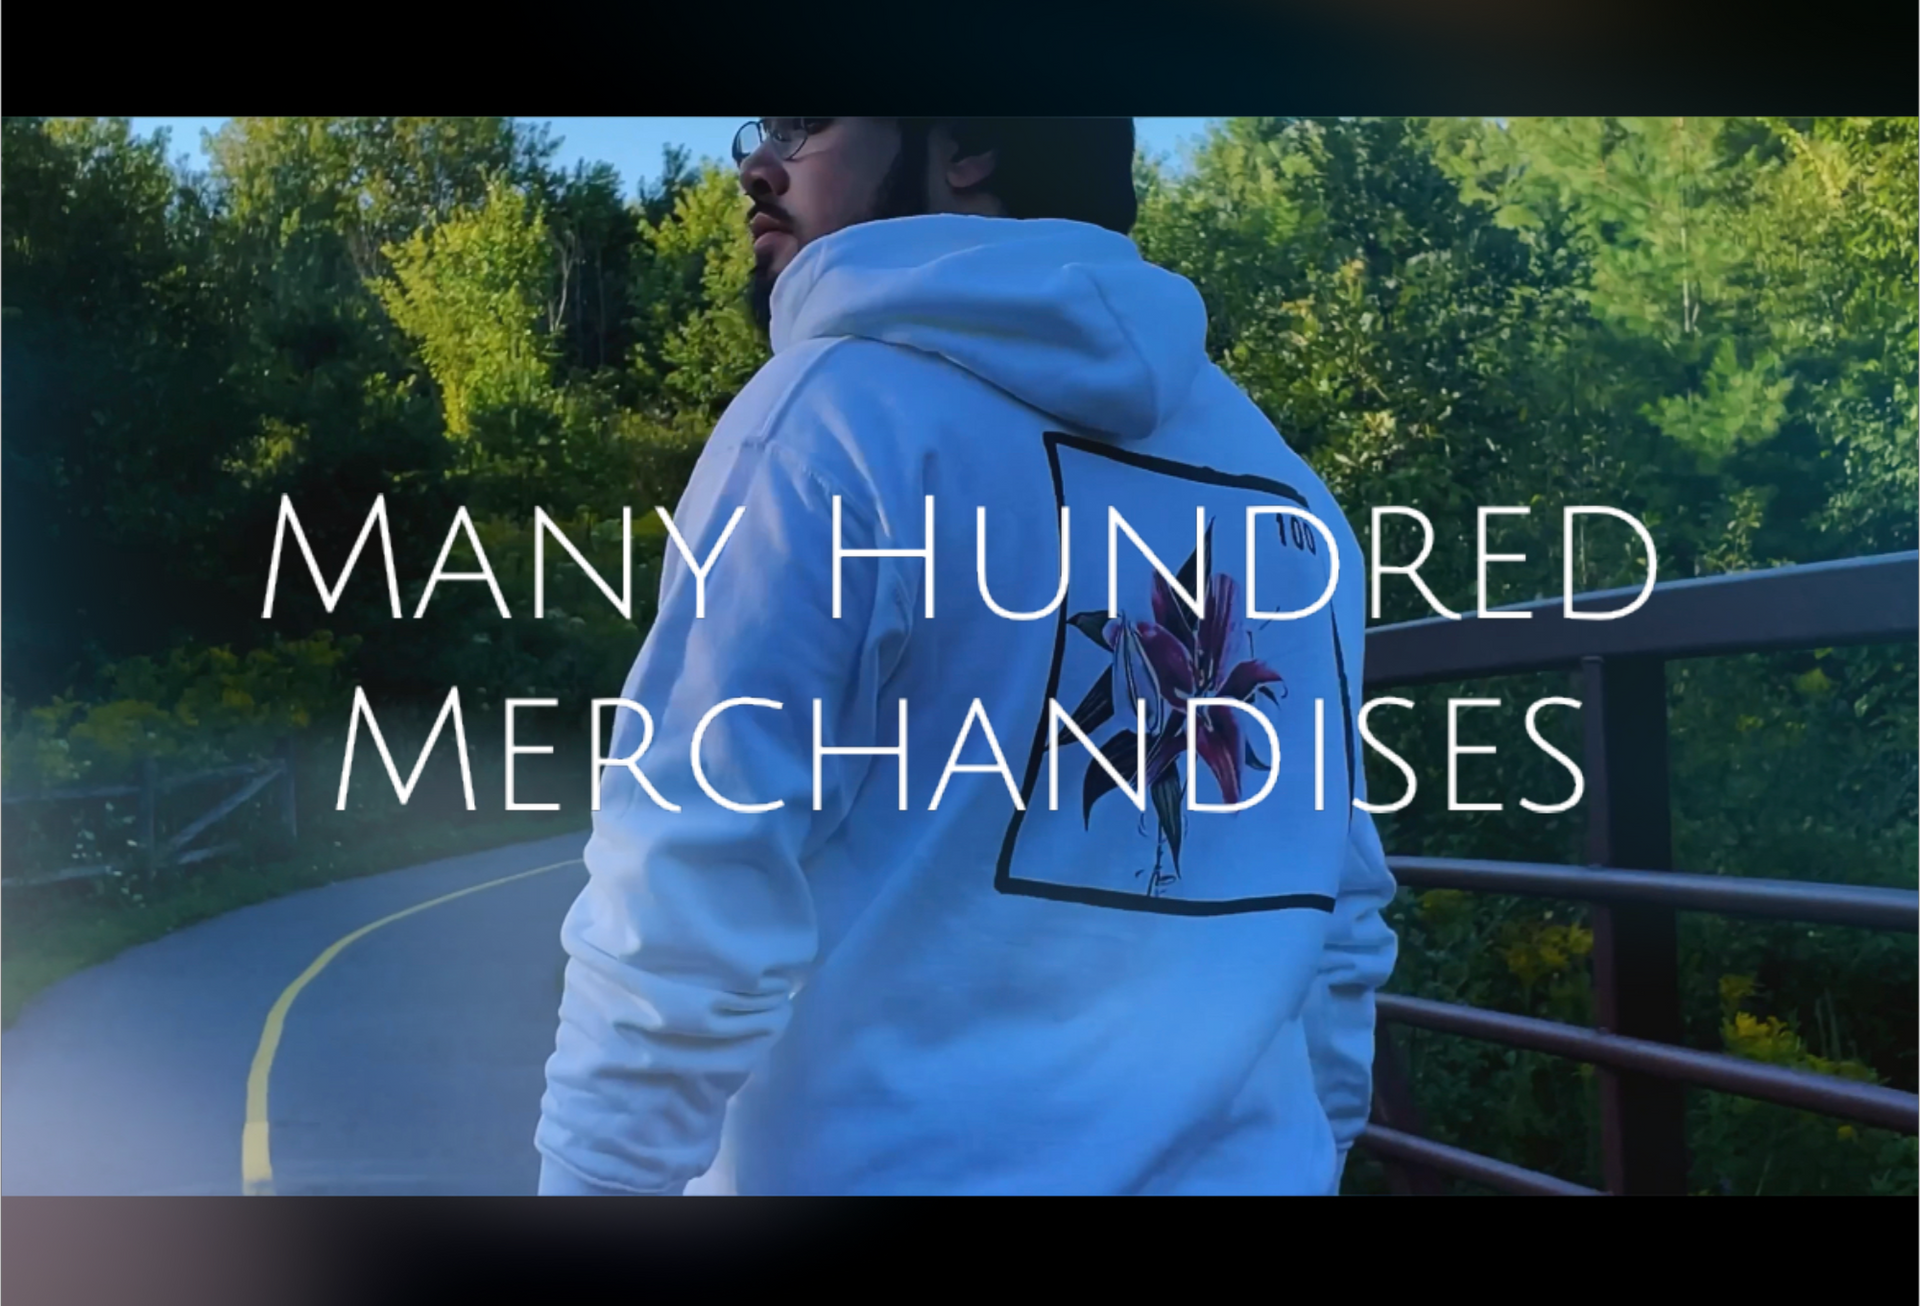 Load video: So now I think you understand, get yourself a nice, beautiful and great quality hoodie!